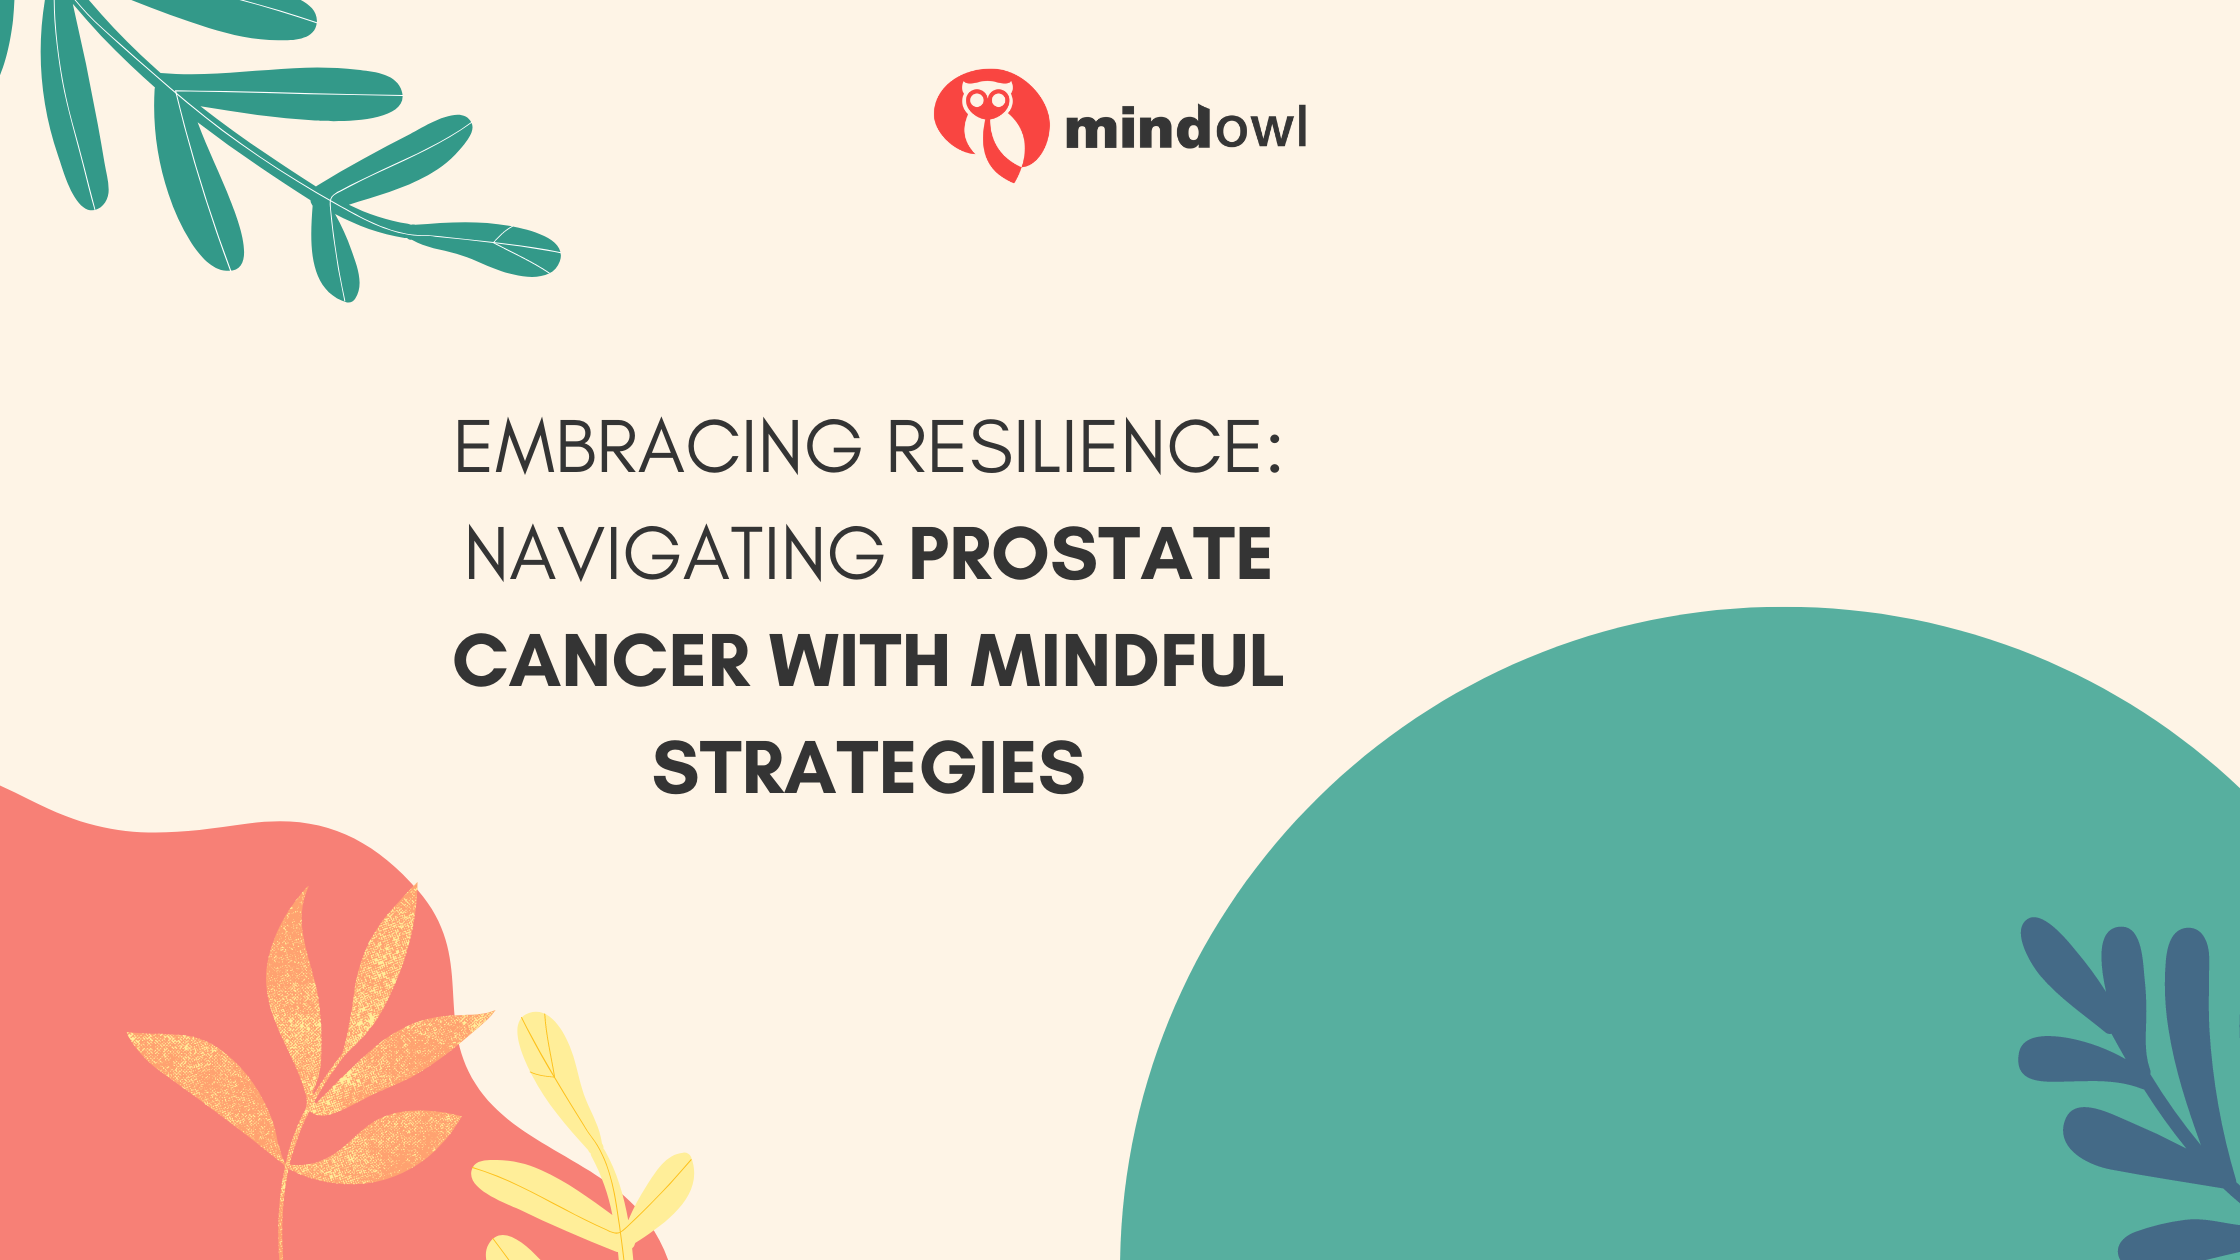 Embracing Resilience: Navigating Prostate Cancer with Mindful Strategies